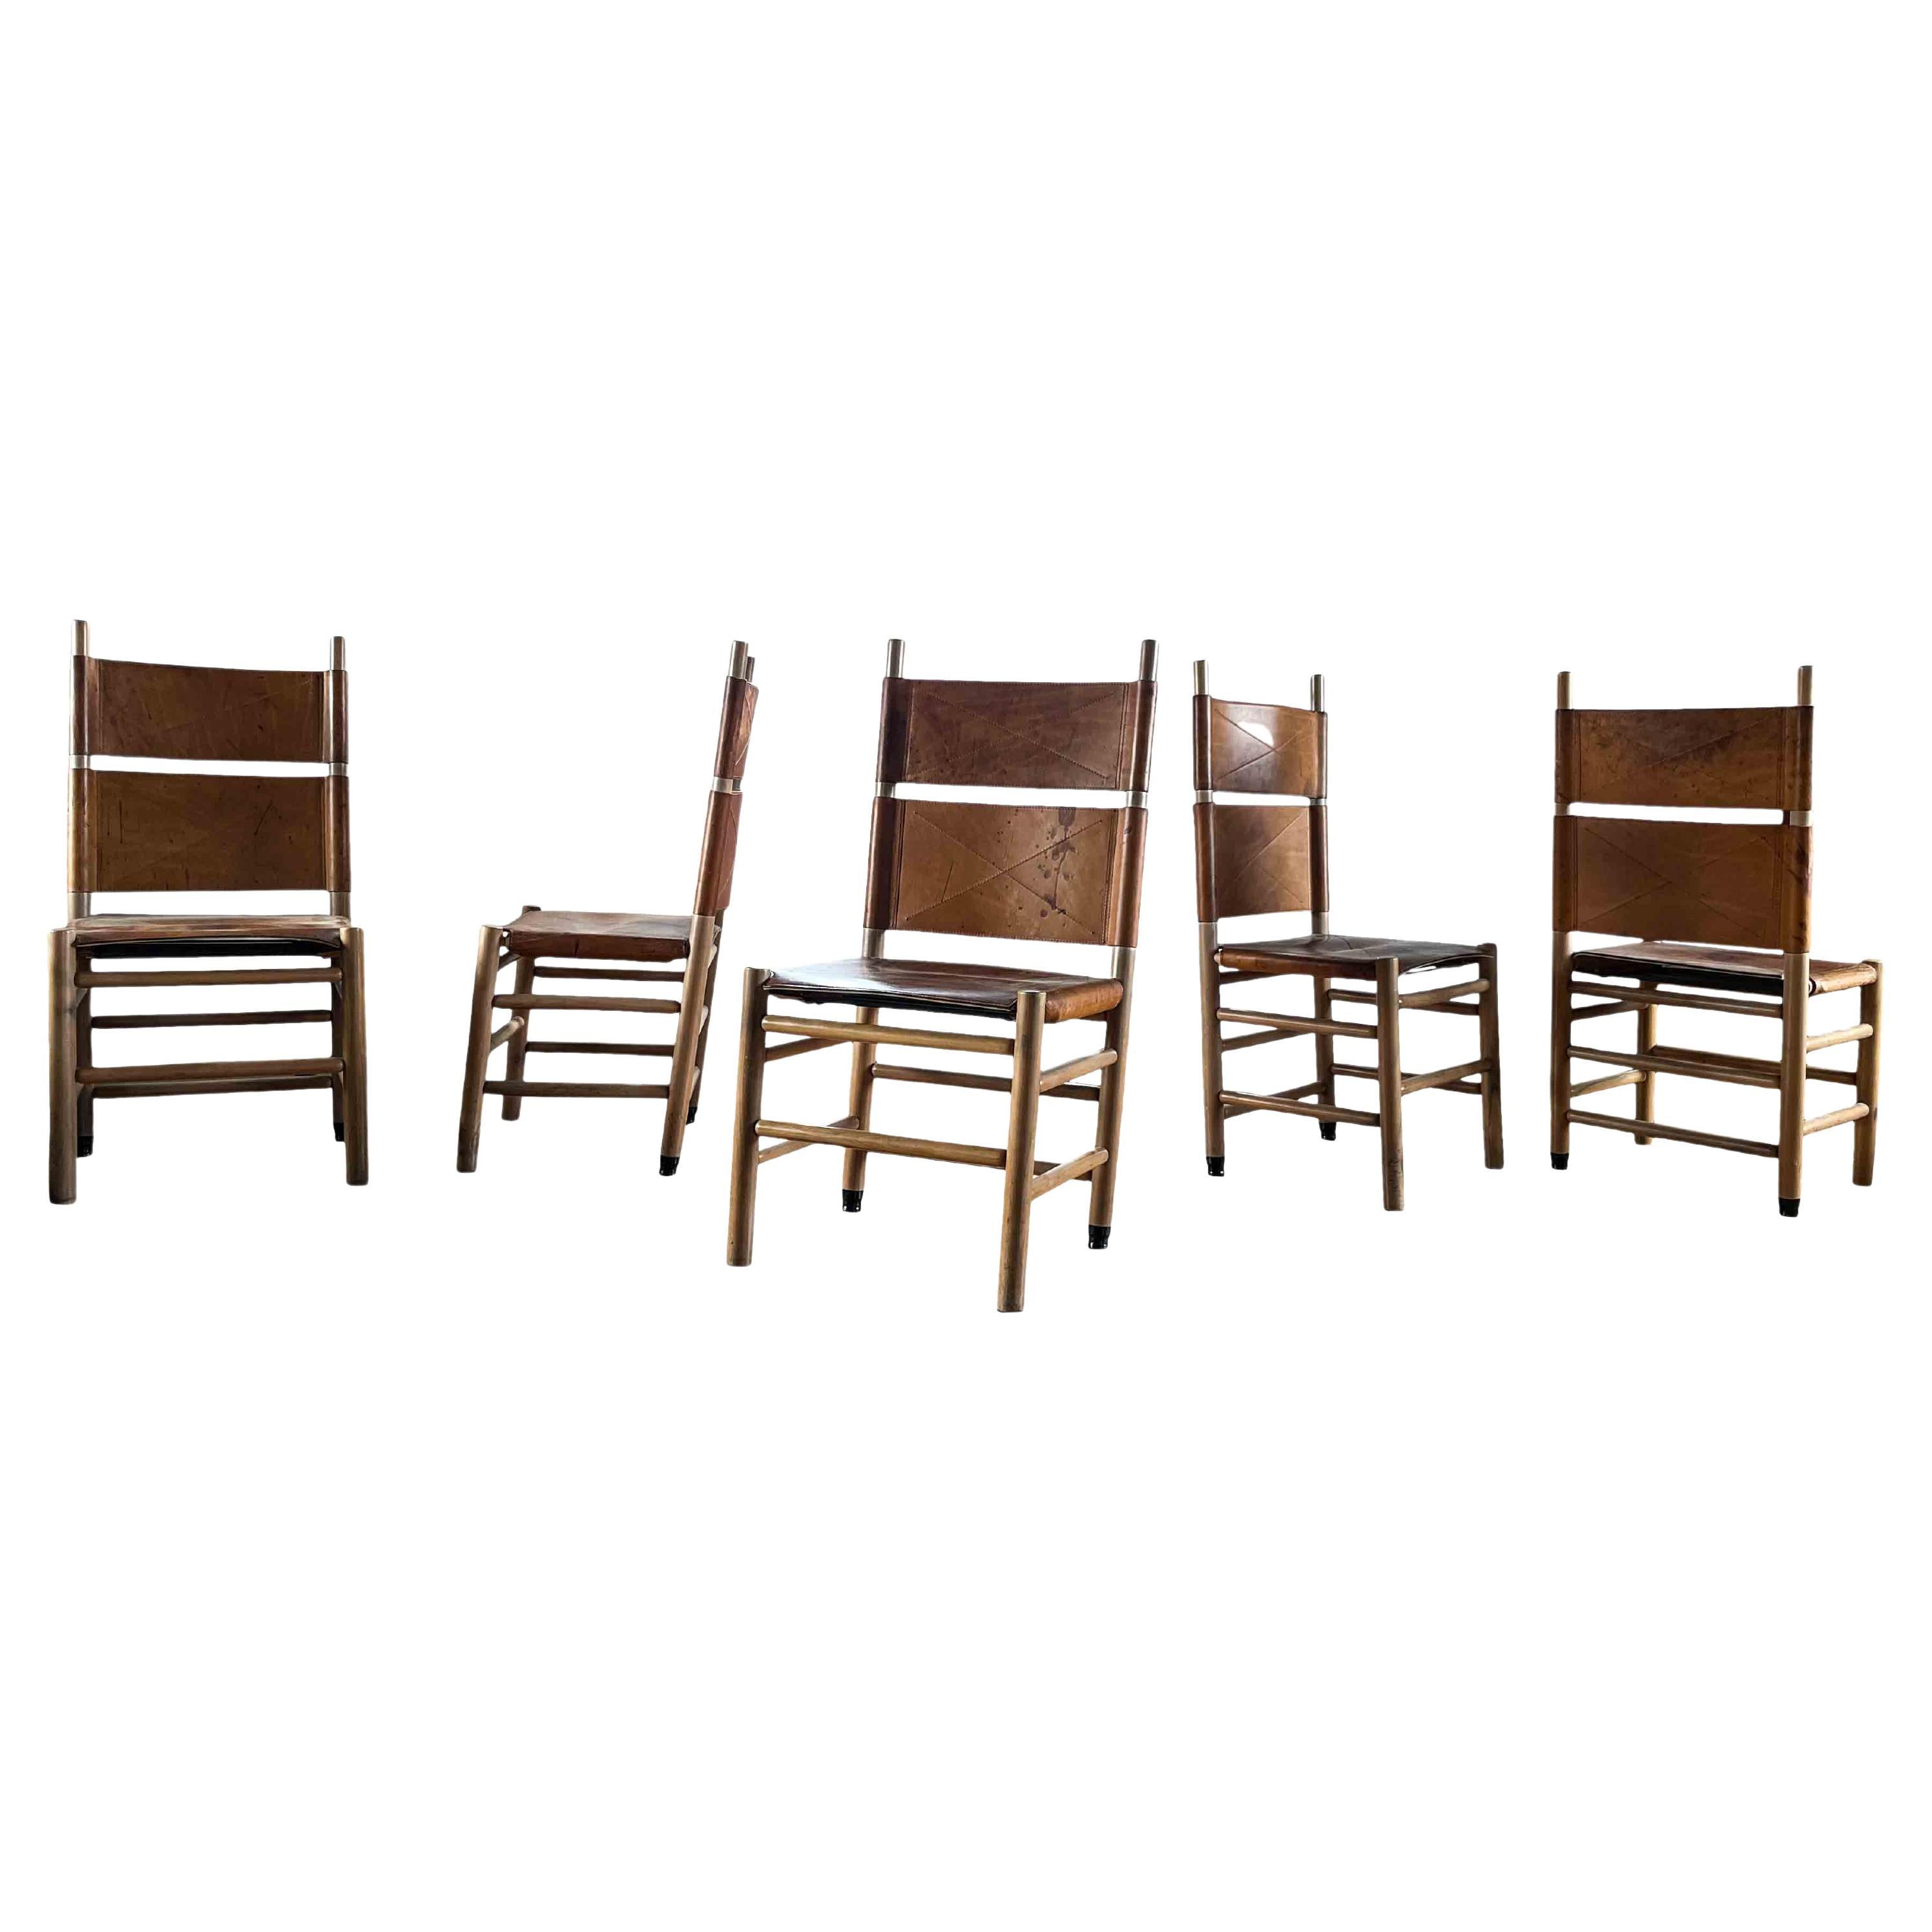 Carlo Scarpa Cognac Leather “Kentucky” Dining Chair for Bernini, 1977, Set of 5 For Sale